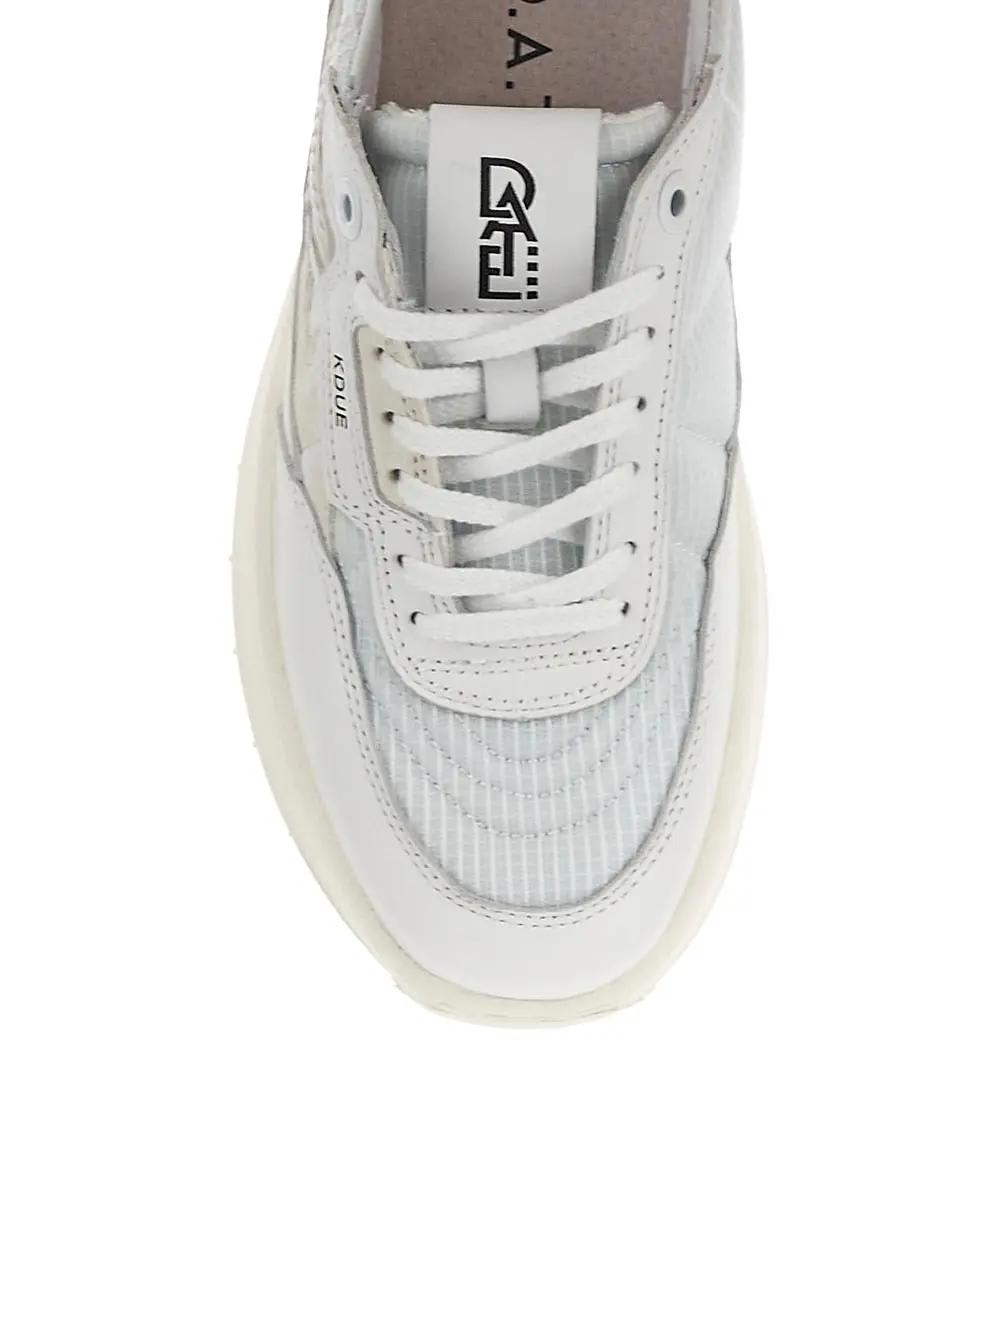 Shop Date Hybrid Sneakers In White